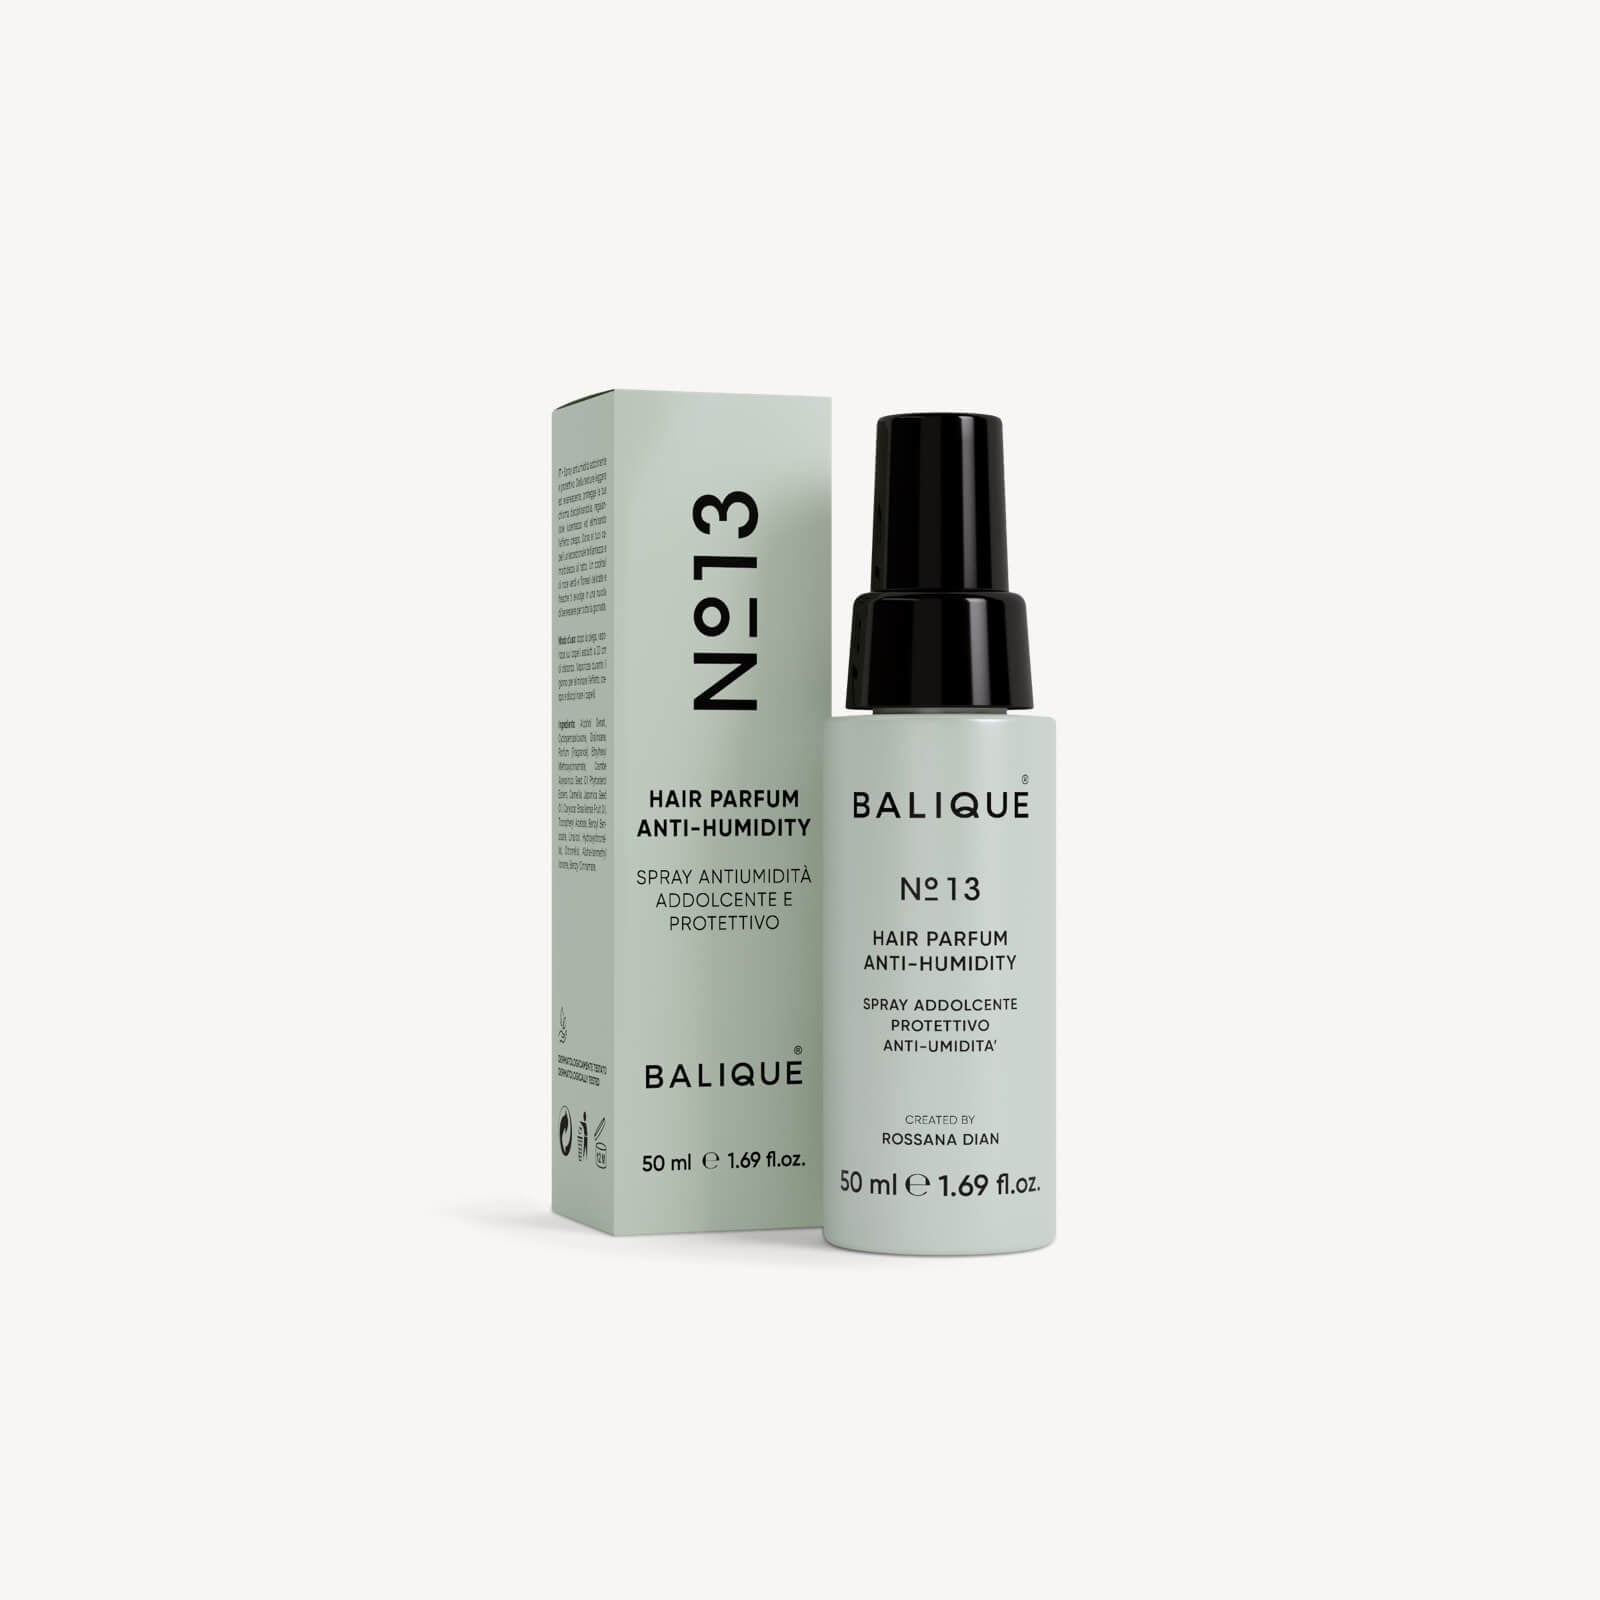 BOX 01 - TRAVEL SIZE - Thin and untreated hair. Complete treatment 